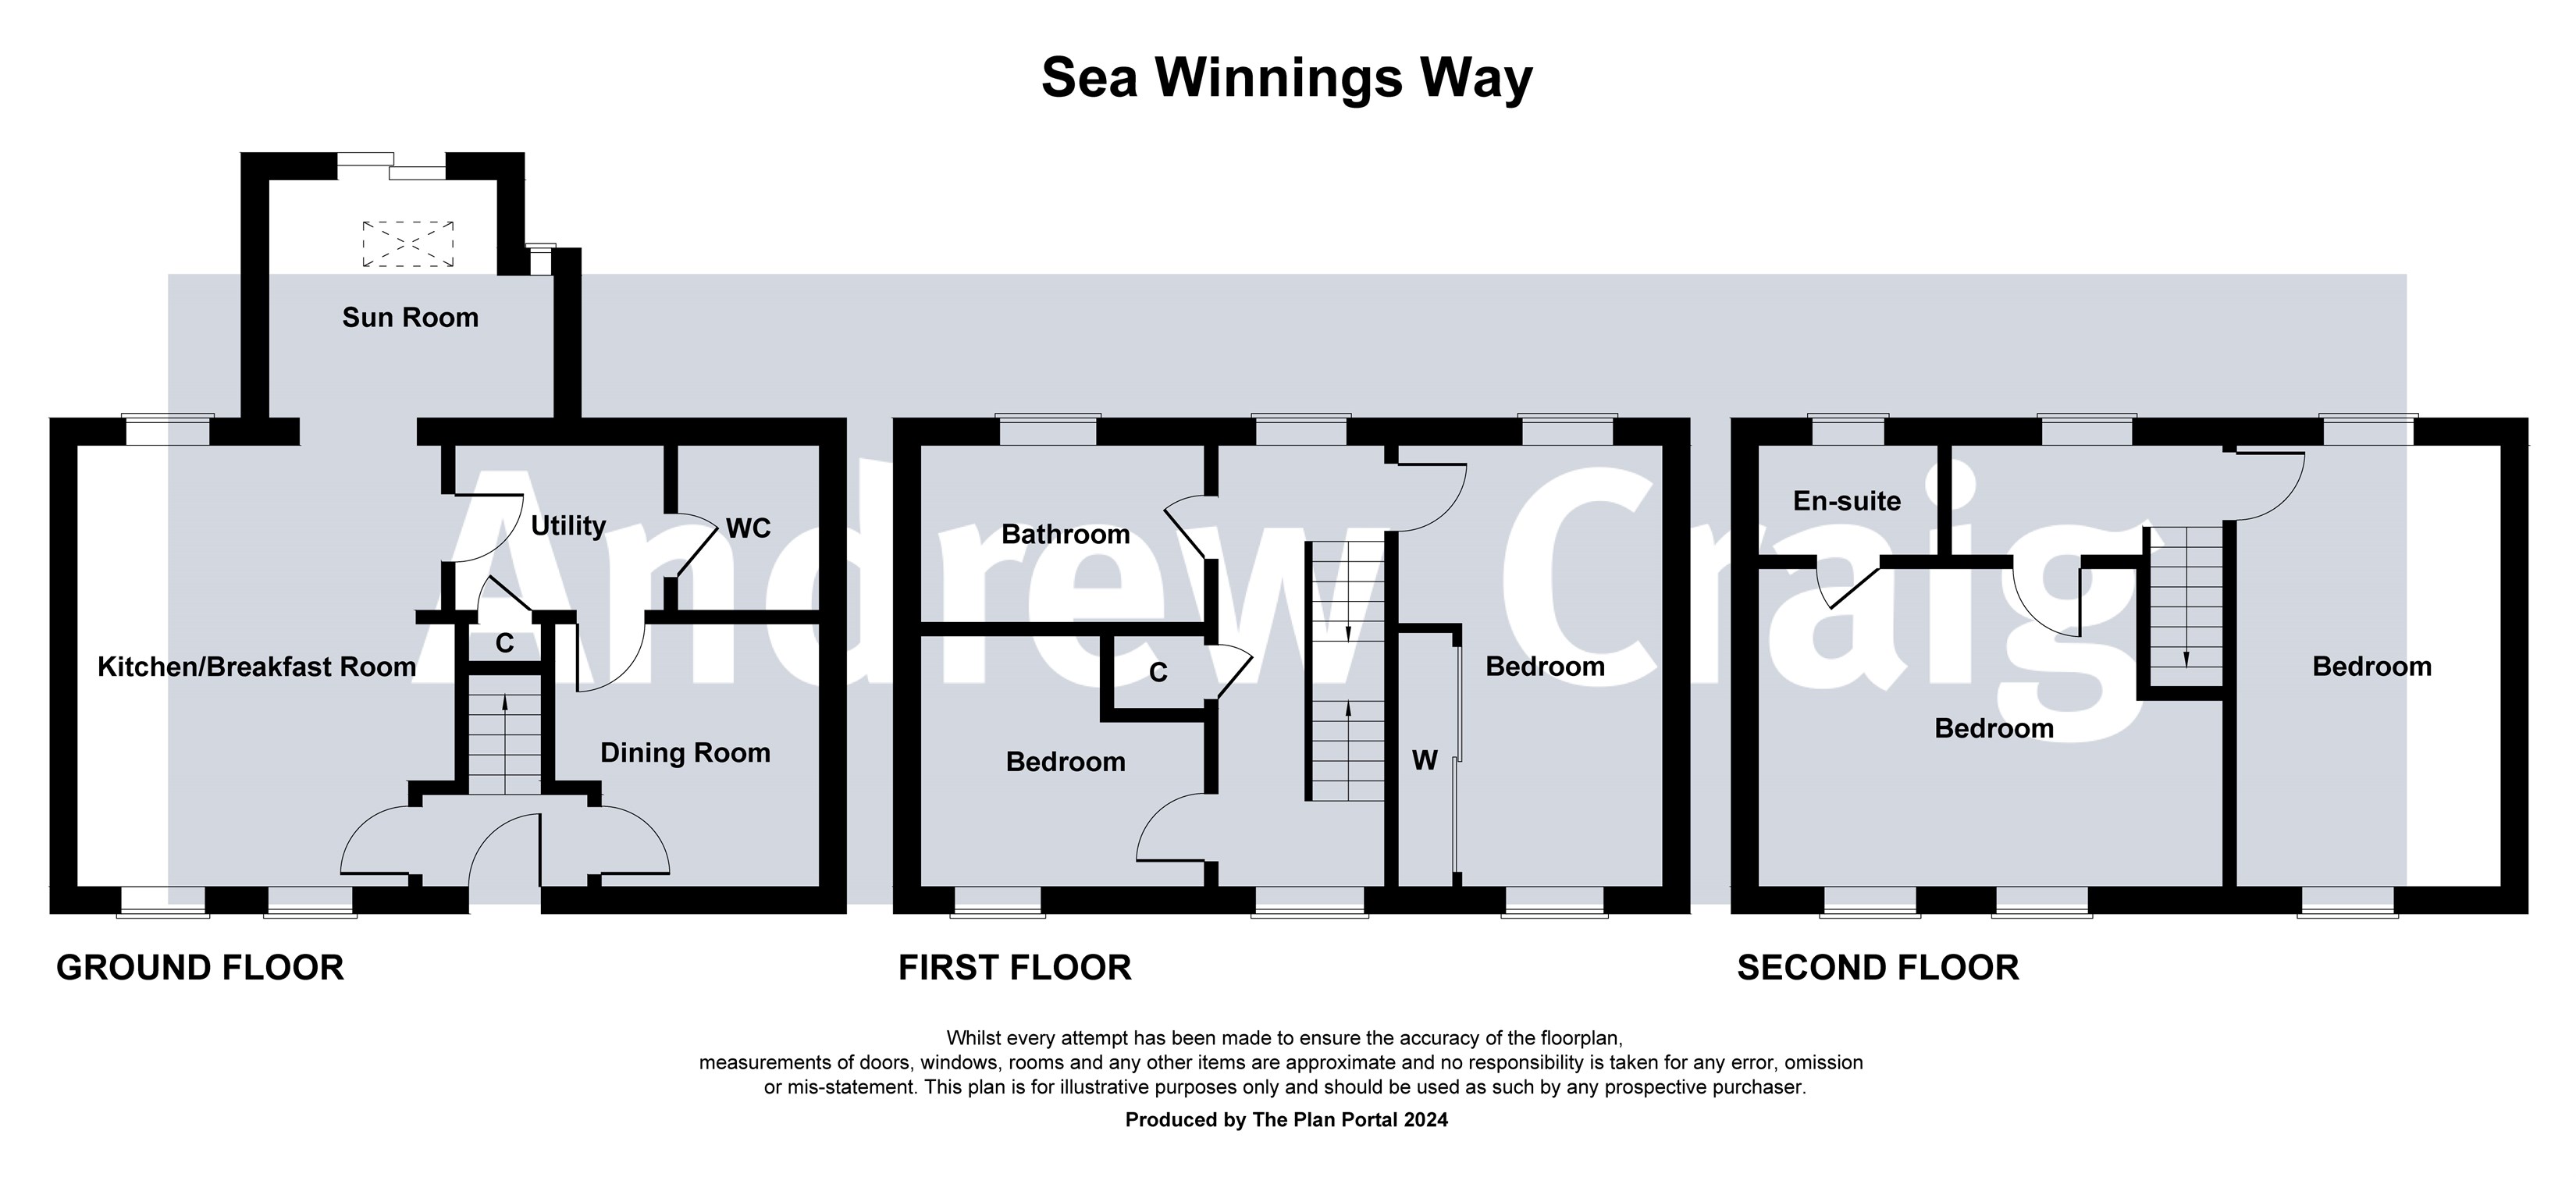 4 bed mid terraced town house for sale in Sea Winnings Way, South Shields - Property floorplan